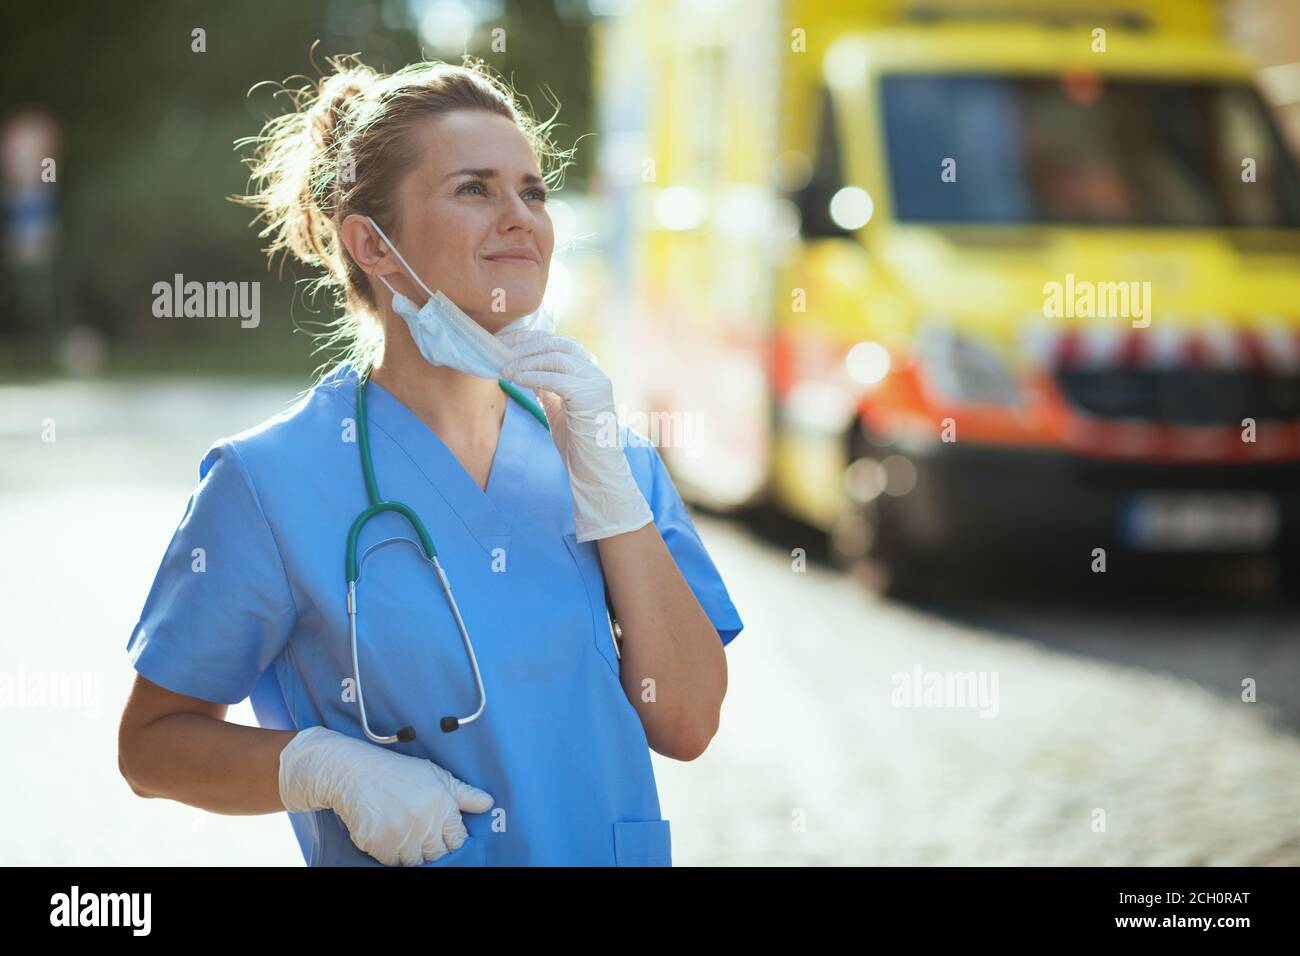 covid-19 pandemic. relaxed modern medical doctor woman in scrubs with stethoscope and medical mask breathing outdoors near ambulance. Stock Photo